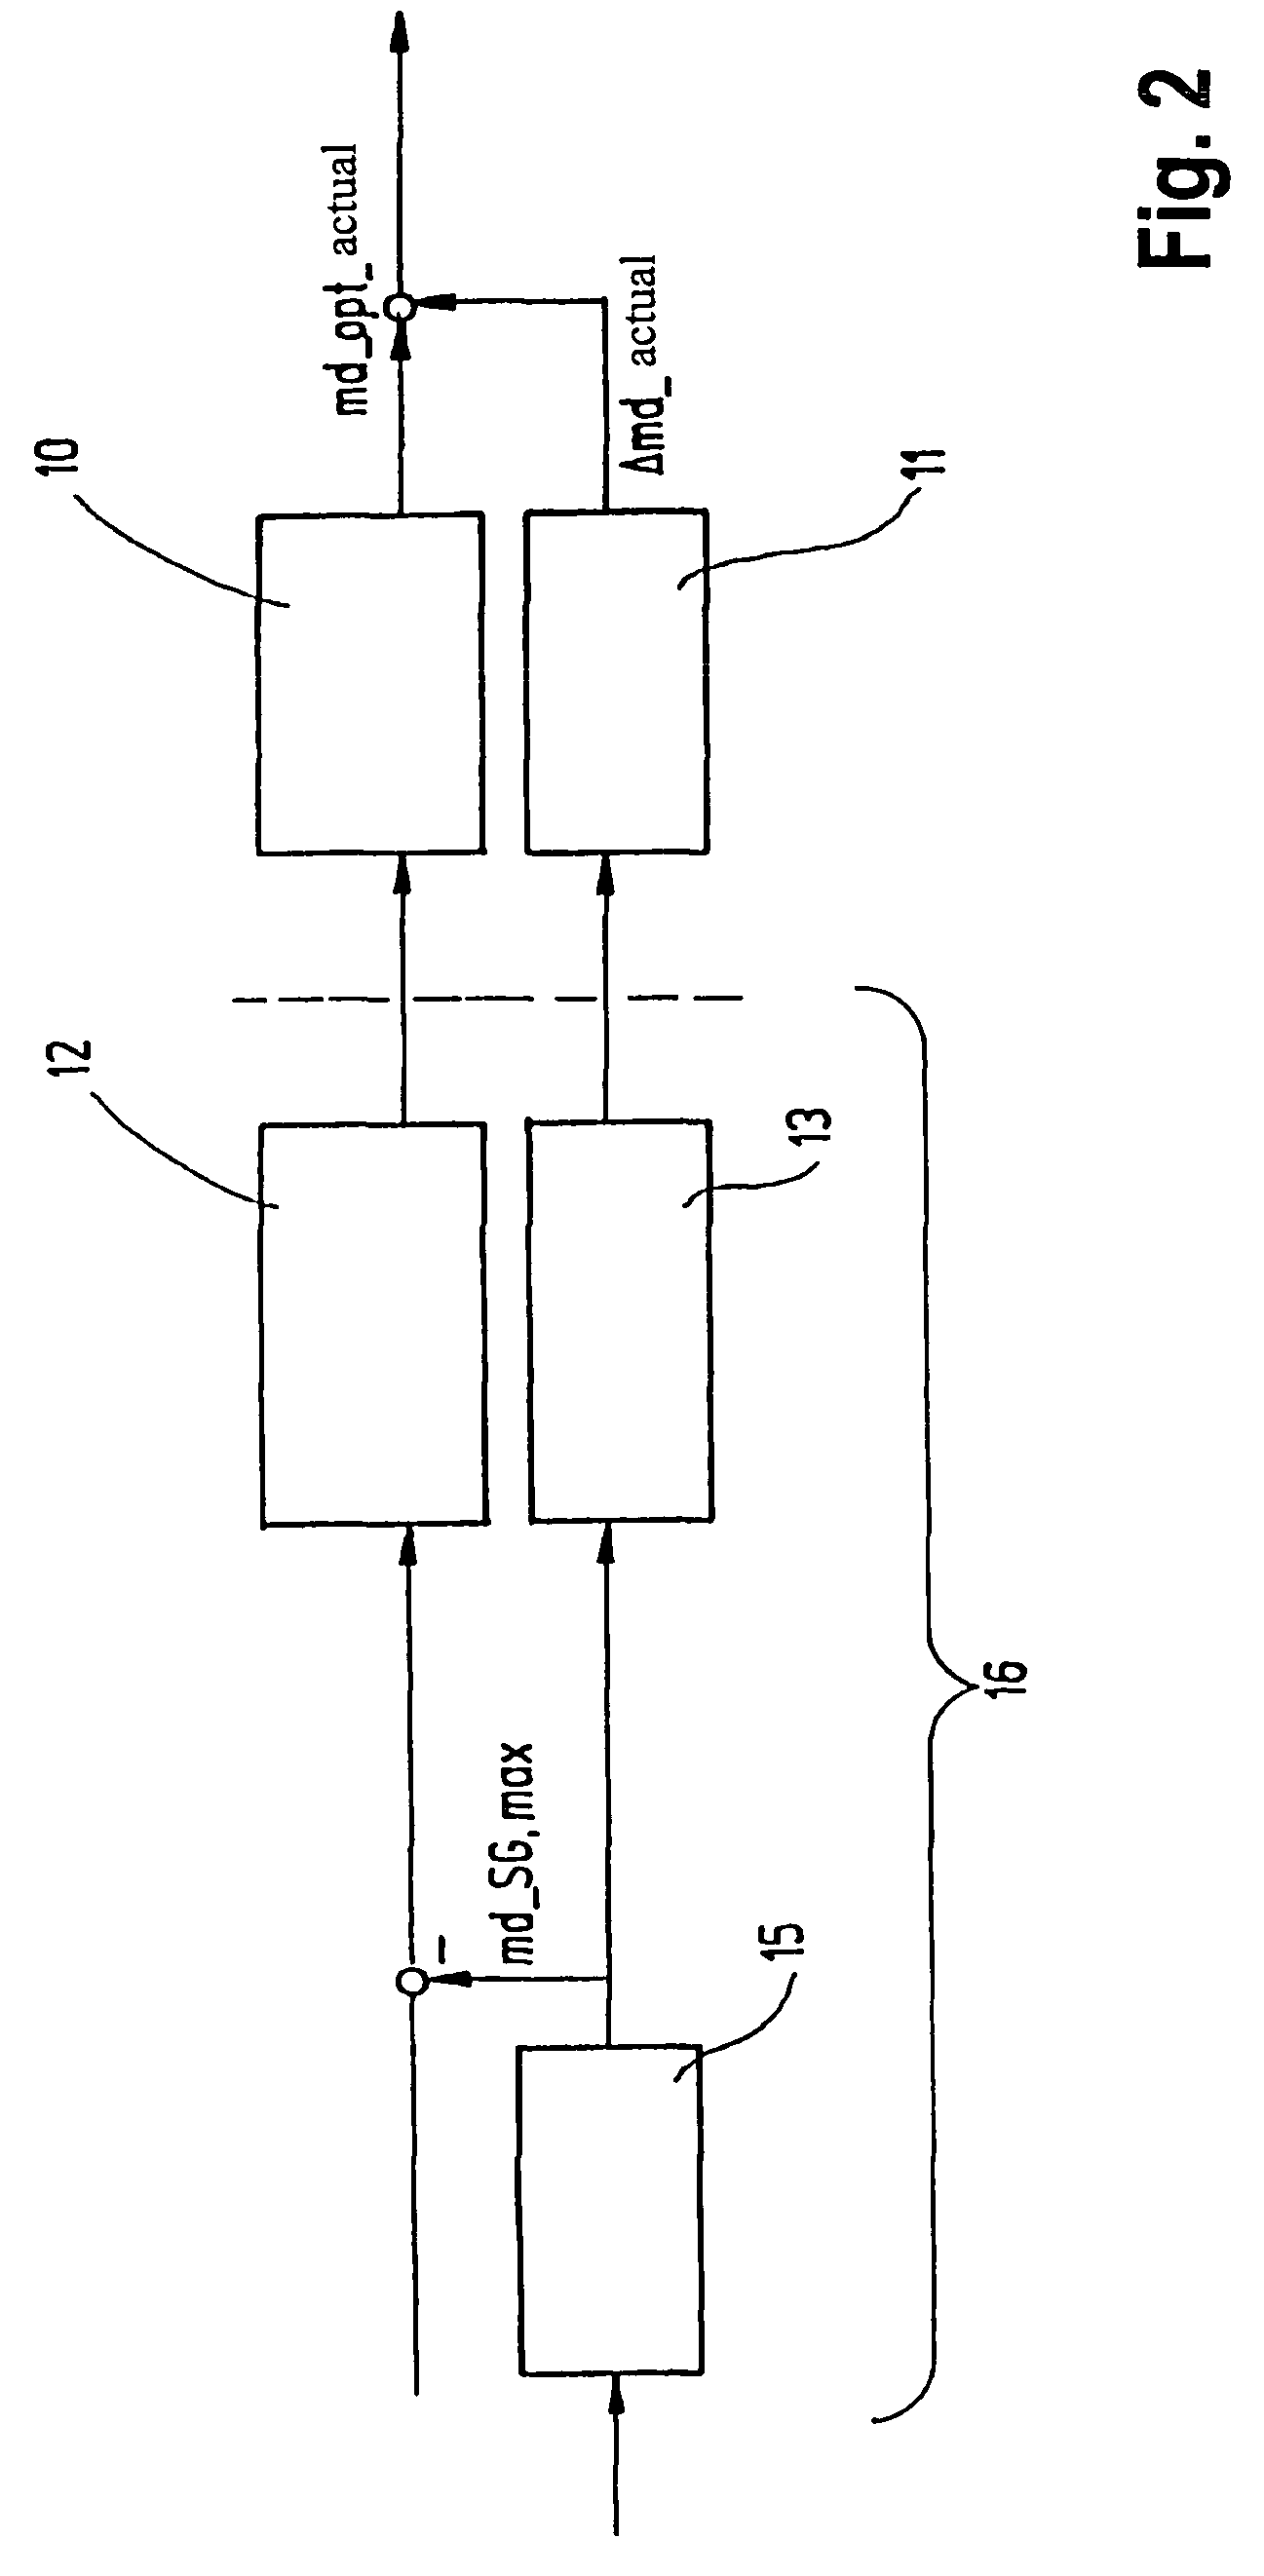 Method of and apparatus for operating a drive train with an electrical machine